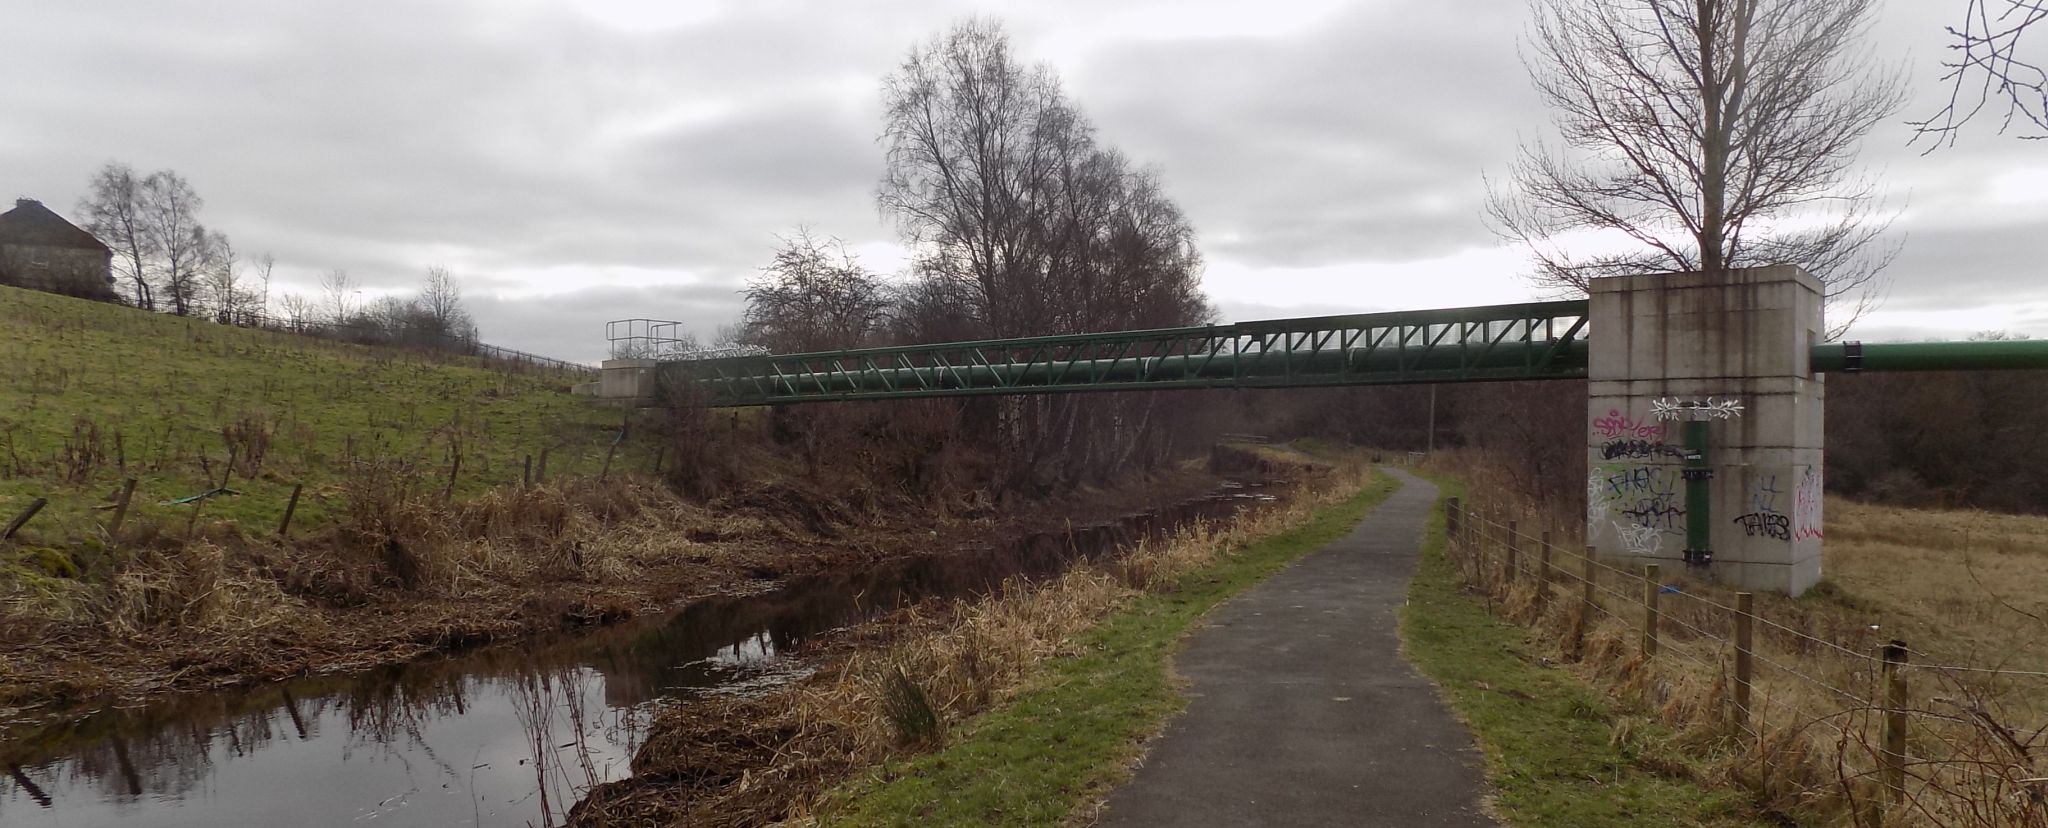 Pipe Bridge over Monkland Canal